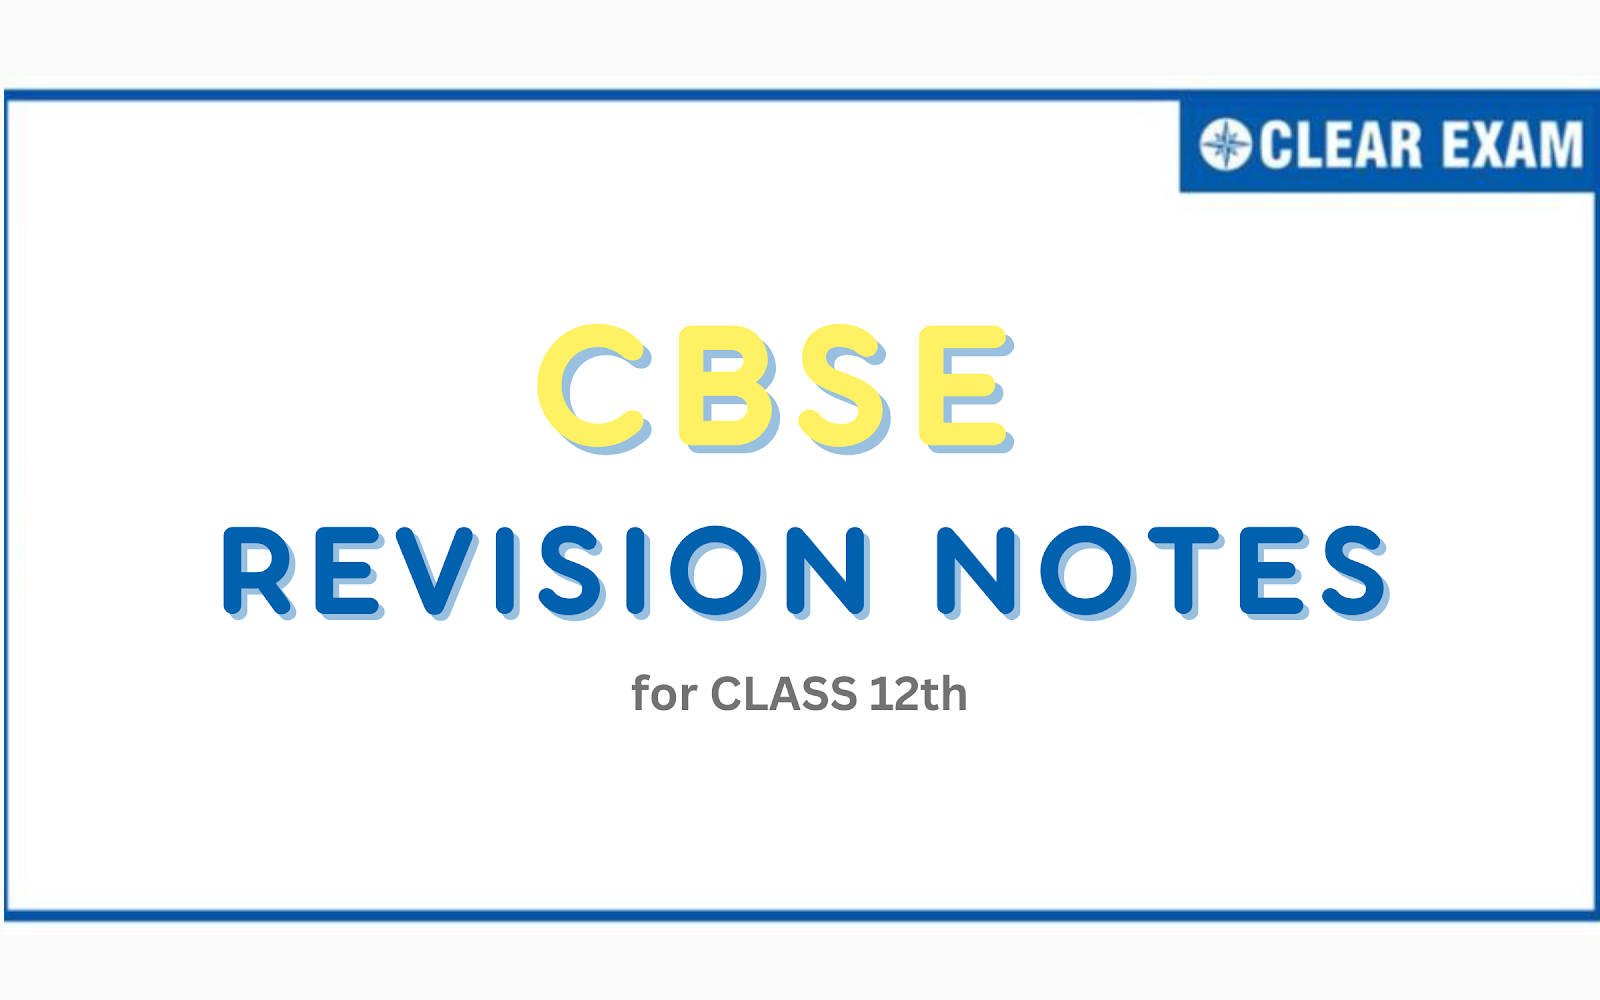 CBSE Revision Notes for Class 12